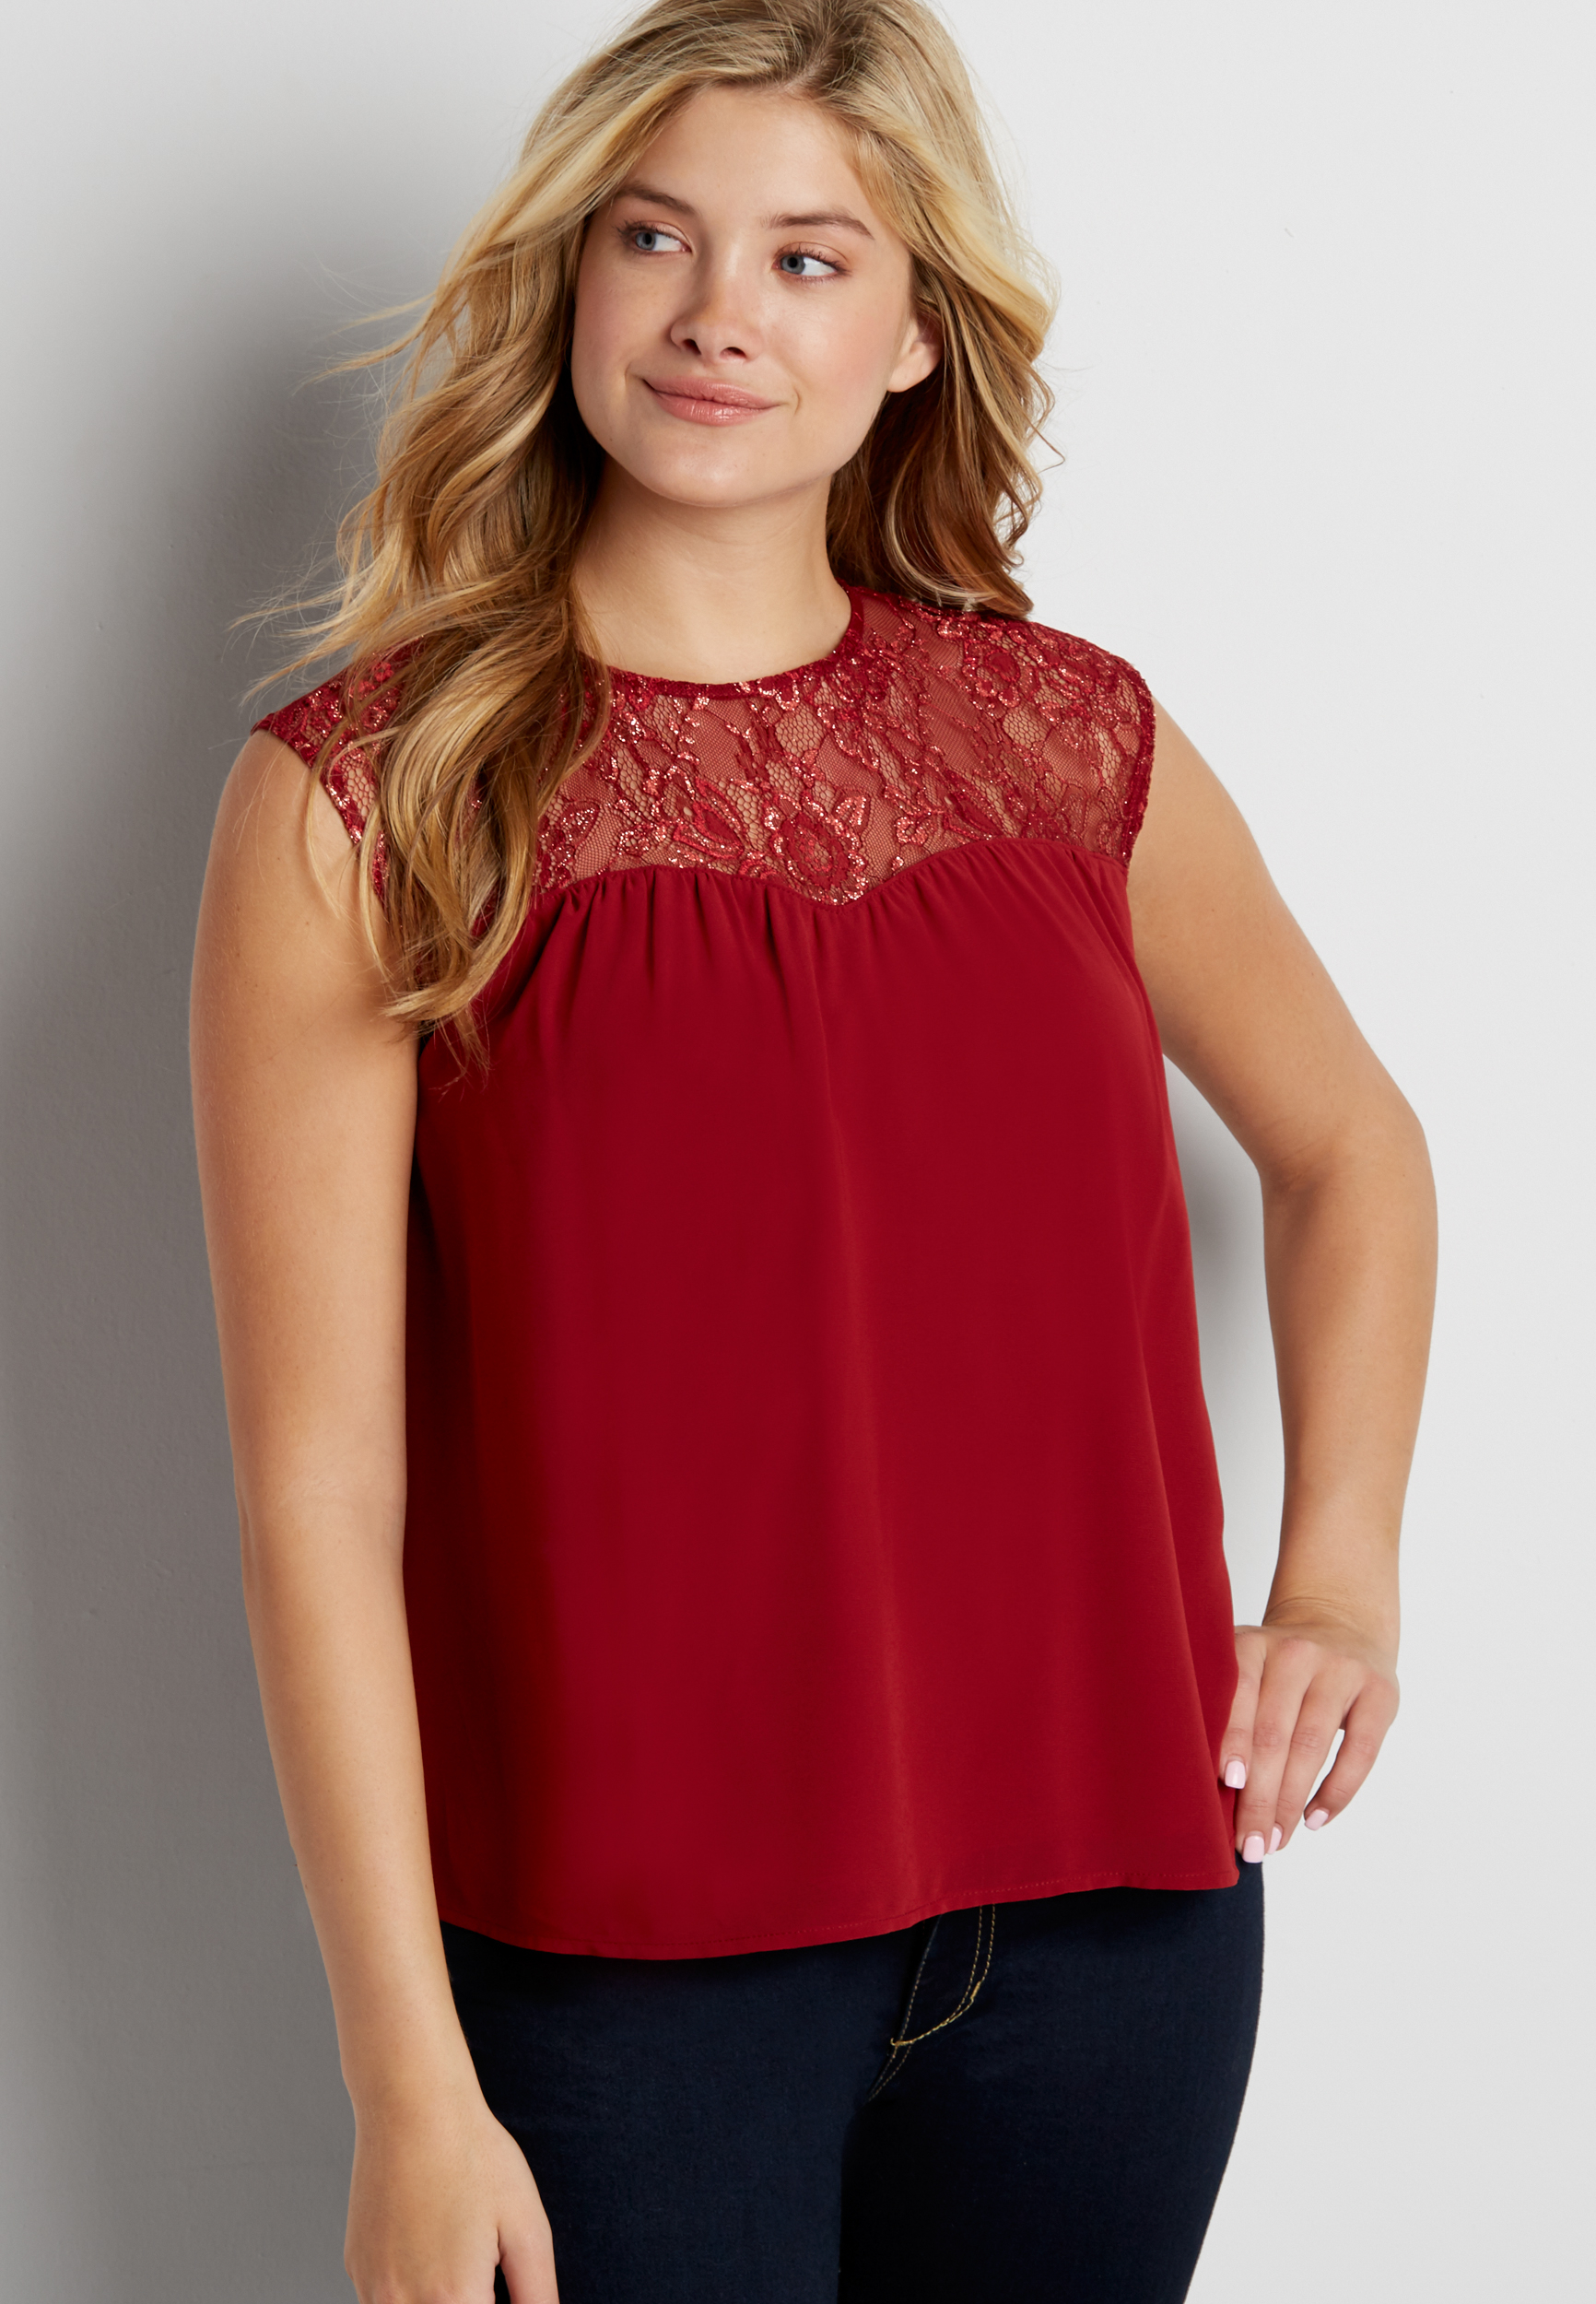 sleeveless top with lace yoke and goldtone metallic detail | maurices